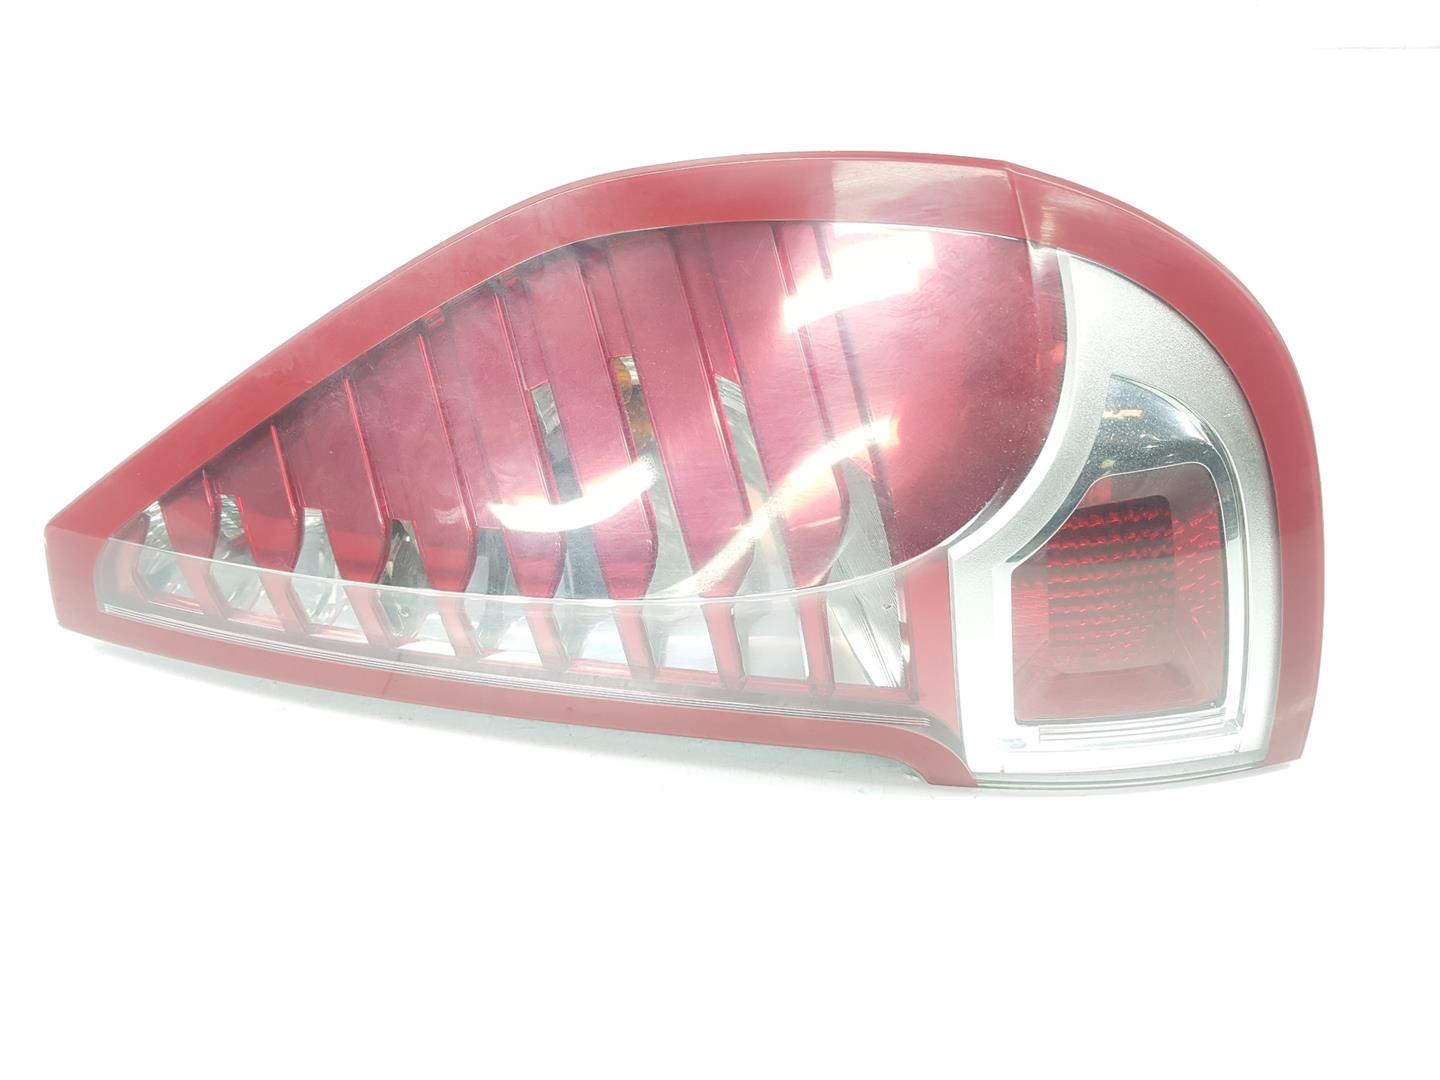 RENAULT Scenic 3 generation (2009-2015) Rear Right Taillight Lamp 265500013R, 265500013R 24207777